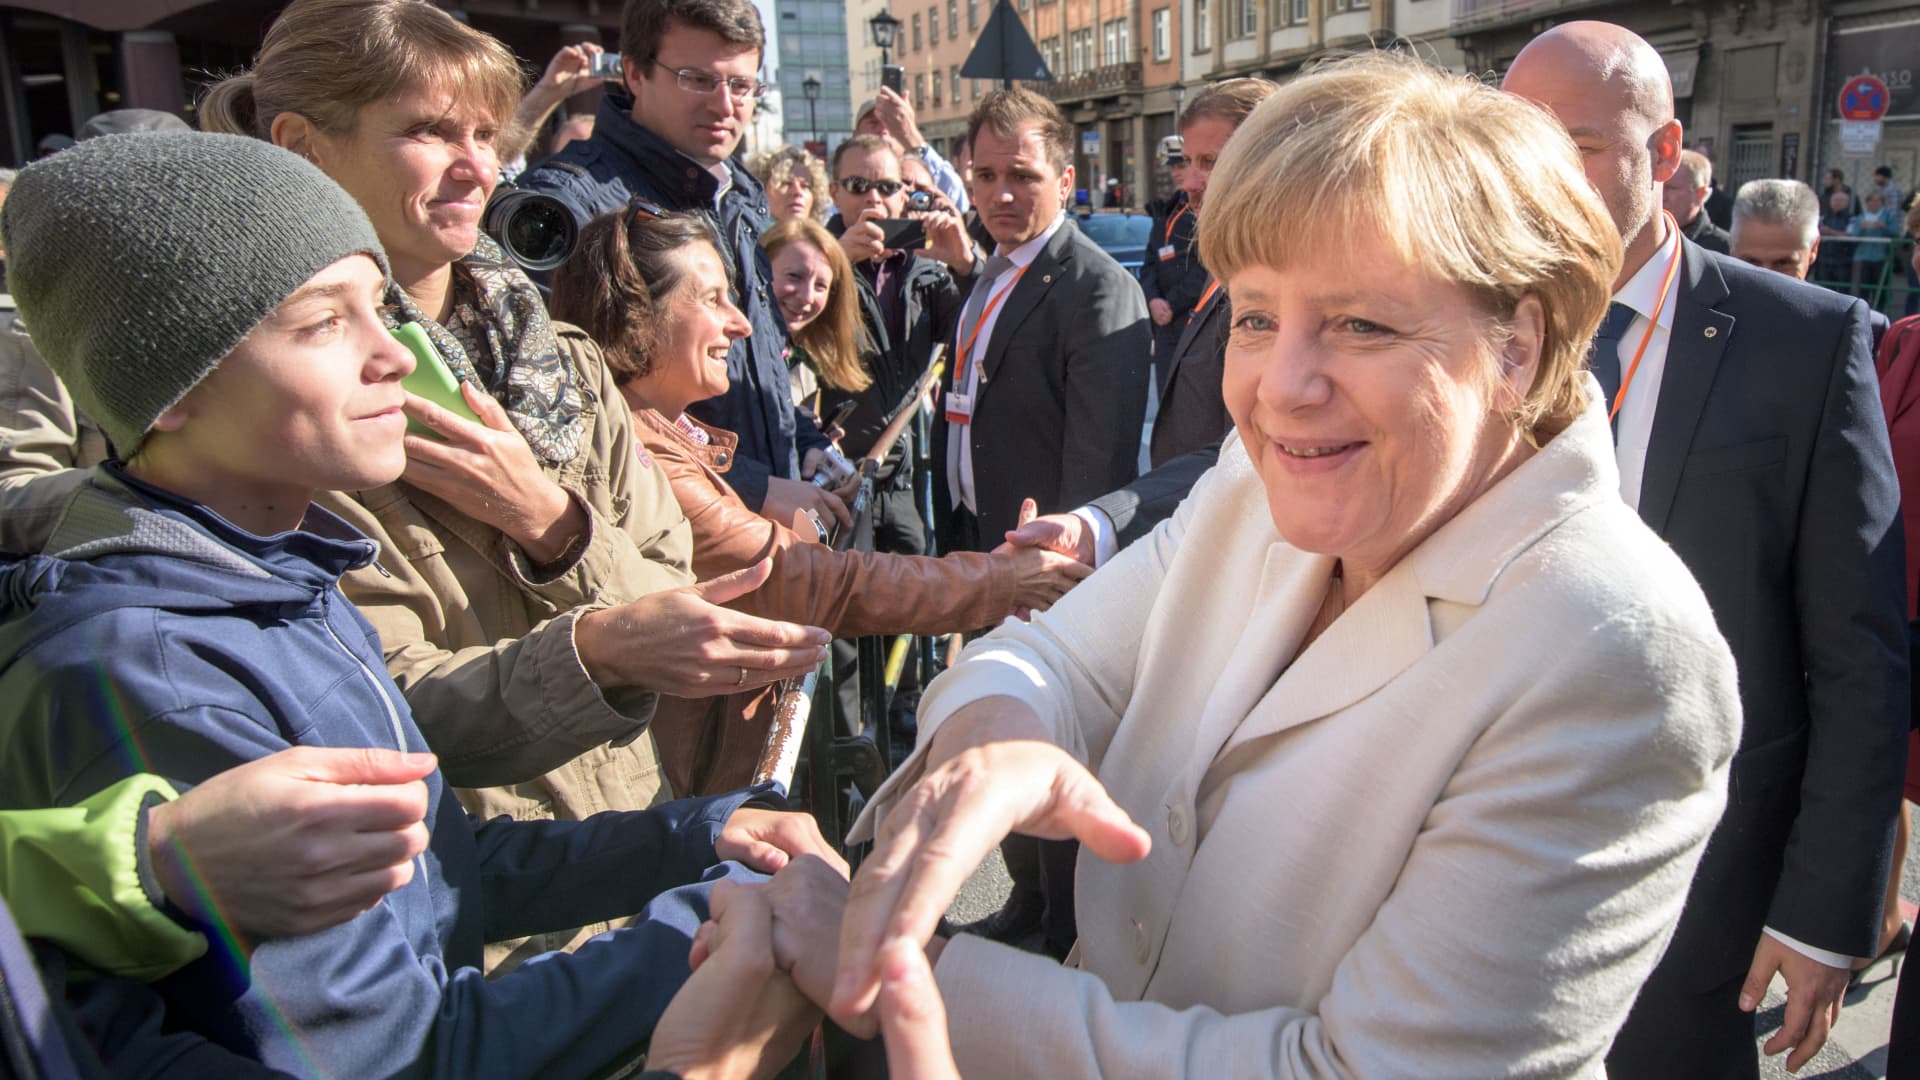 Outgoing German Chancellor Angela Merkel greets the crowds in Frankfurt, Germany.